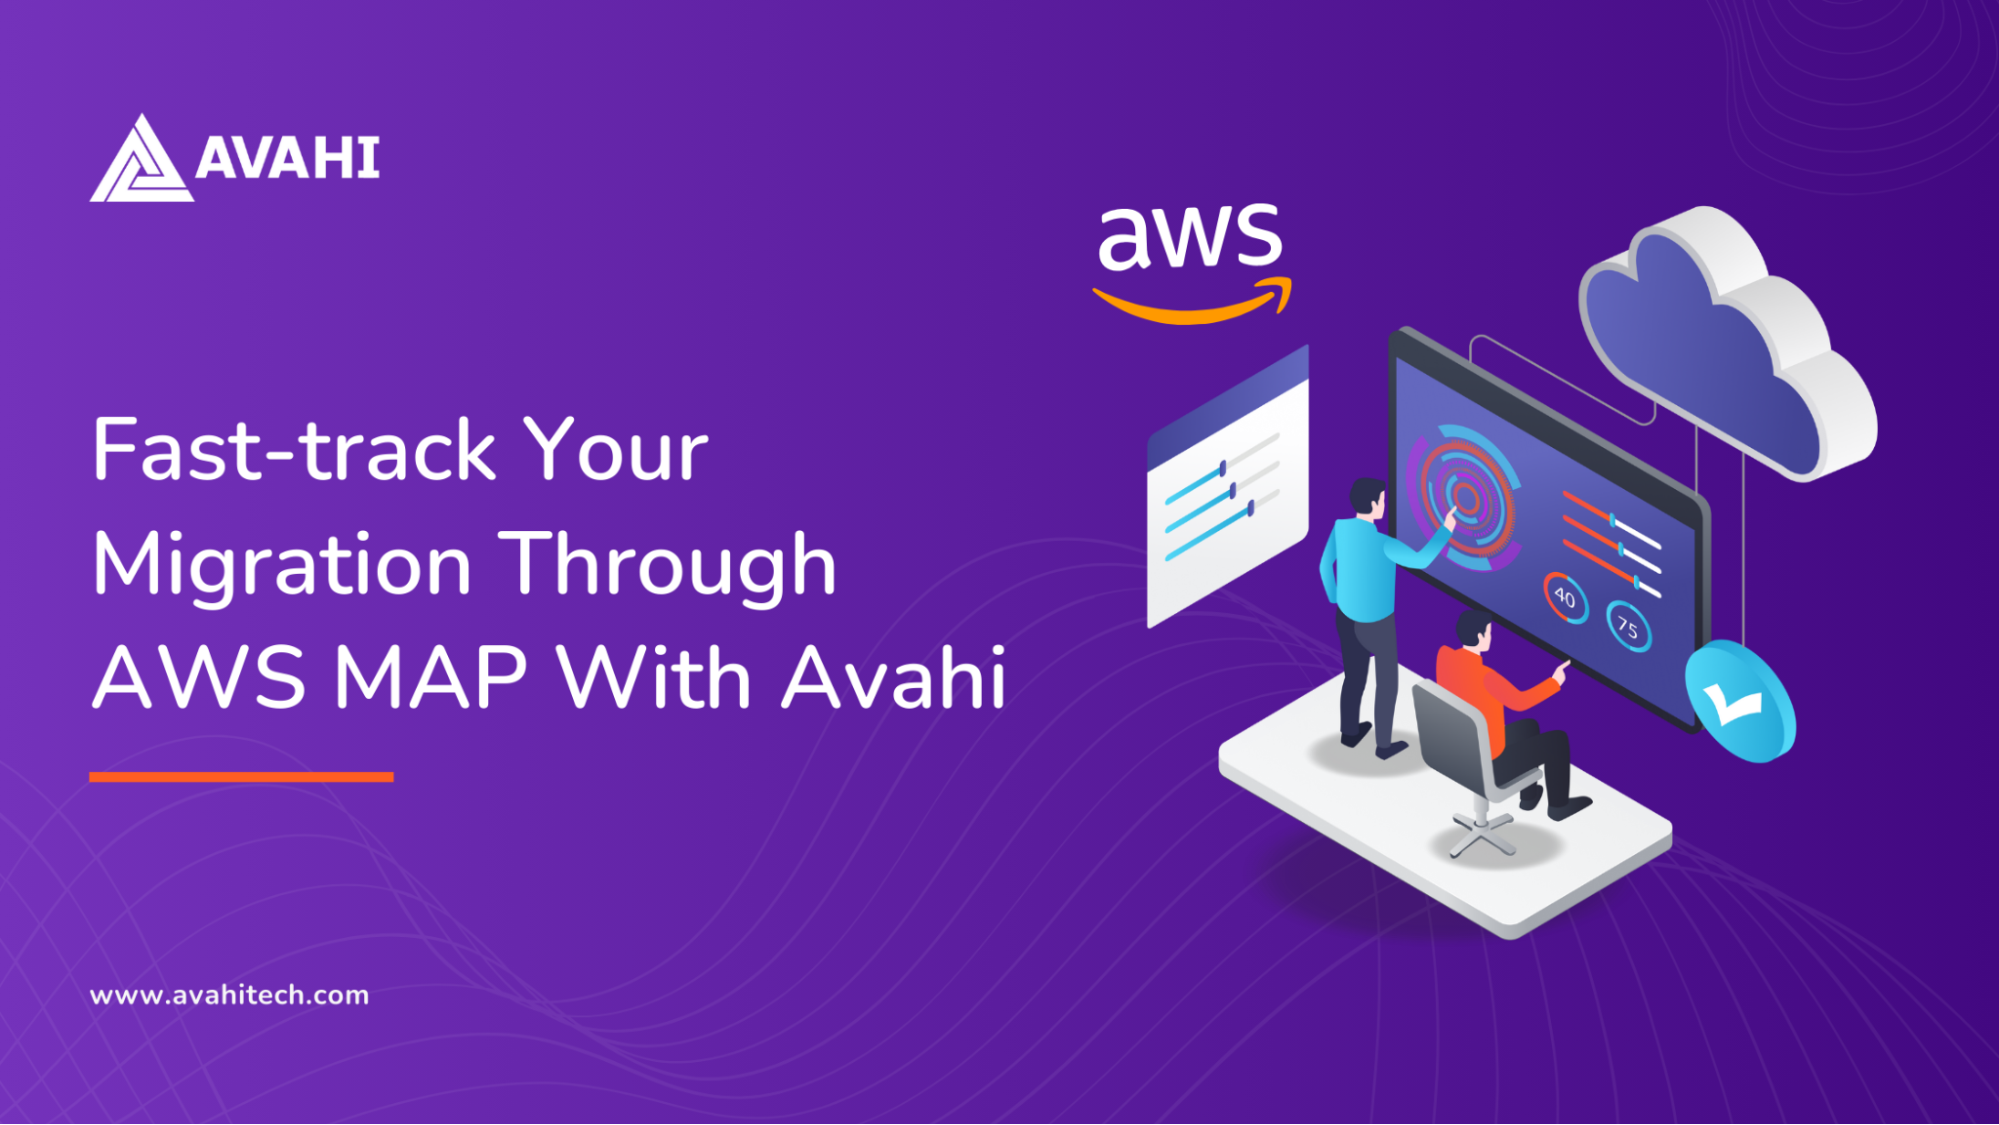 Fast-track Your Migration Through AWS MAP With Avahi